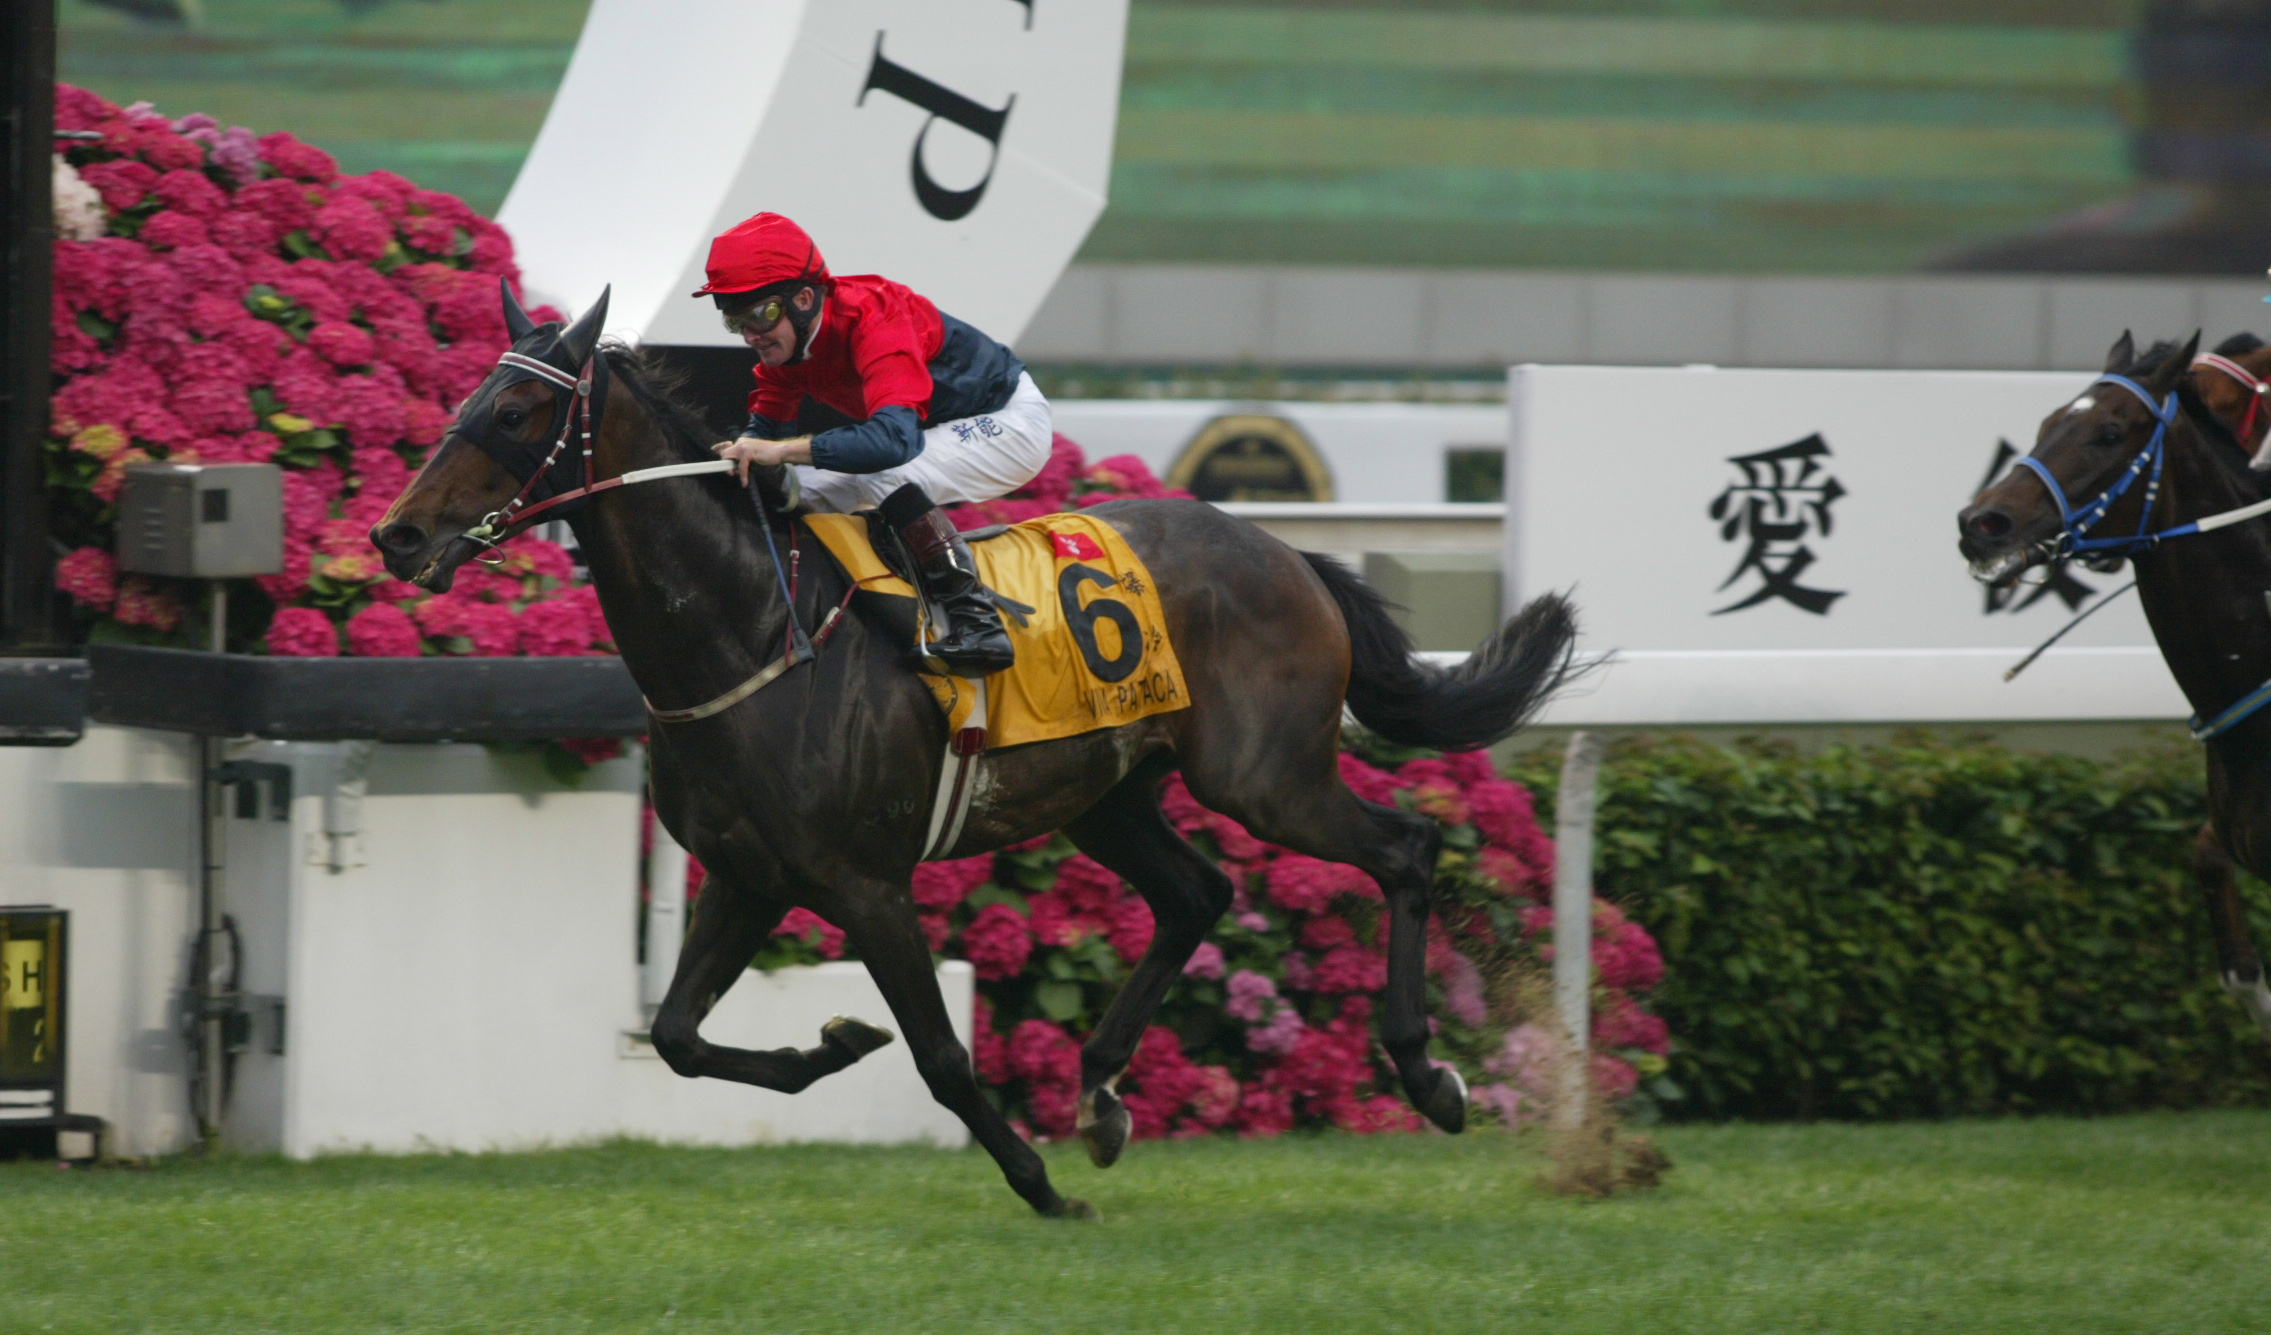 John Moore trained the prolific Viva Pataca to win the Hong Kong Derby in 2006 and be Horse of the Year three years later. Photo: HKJC